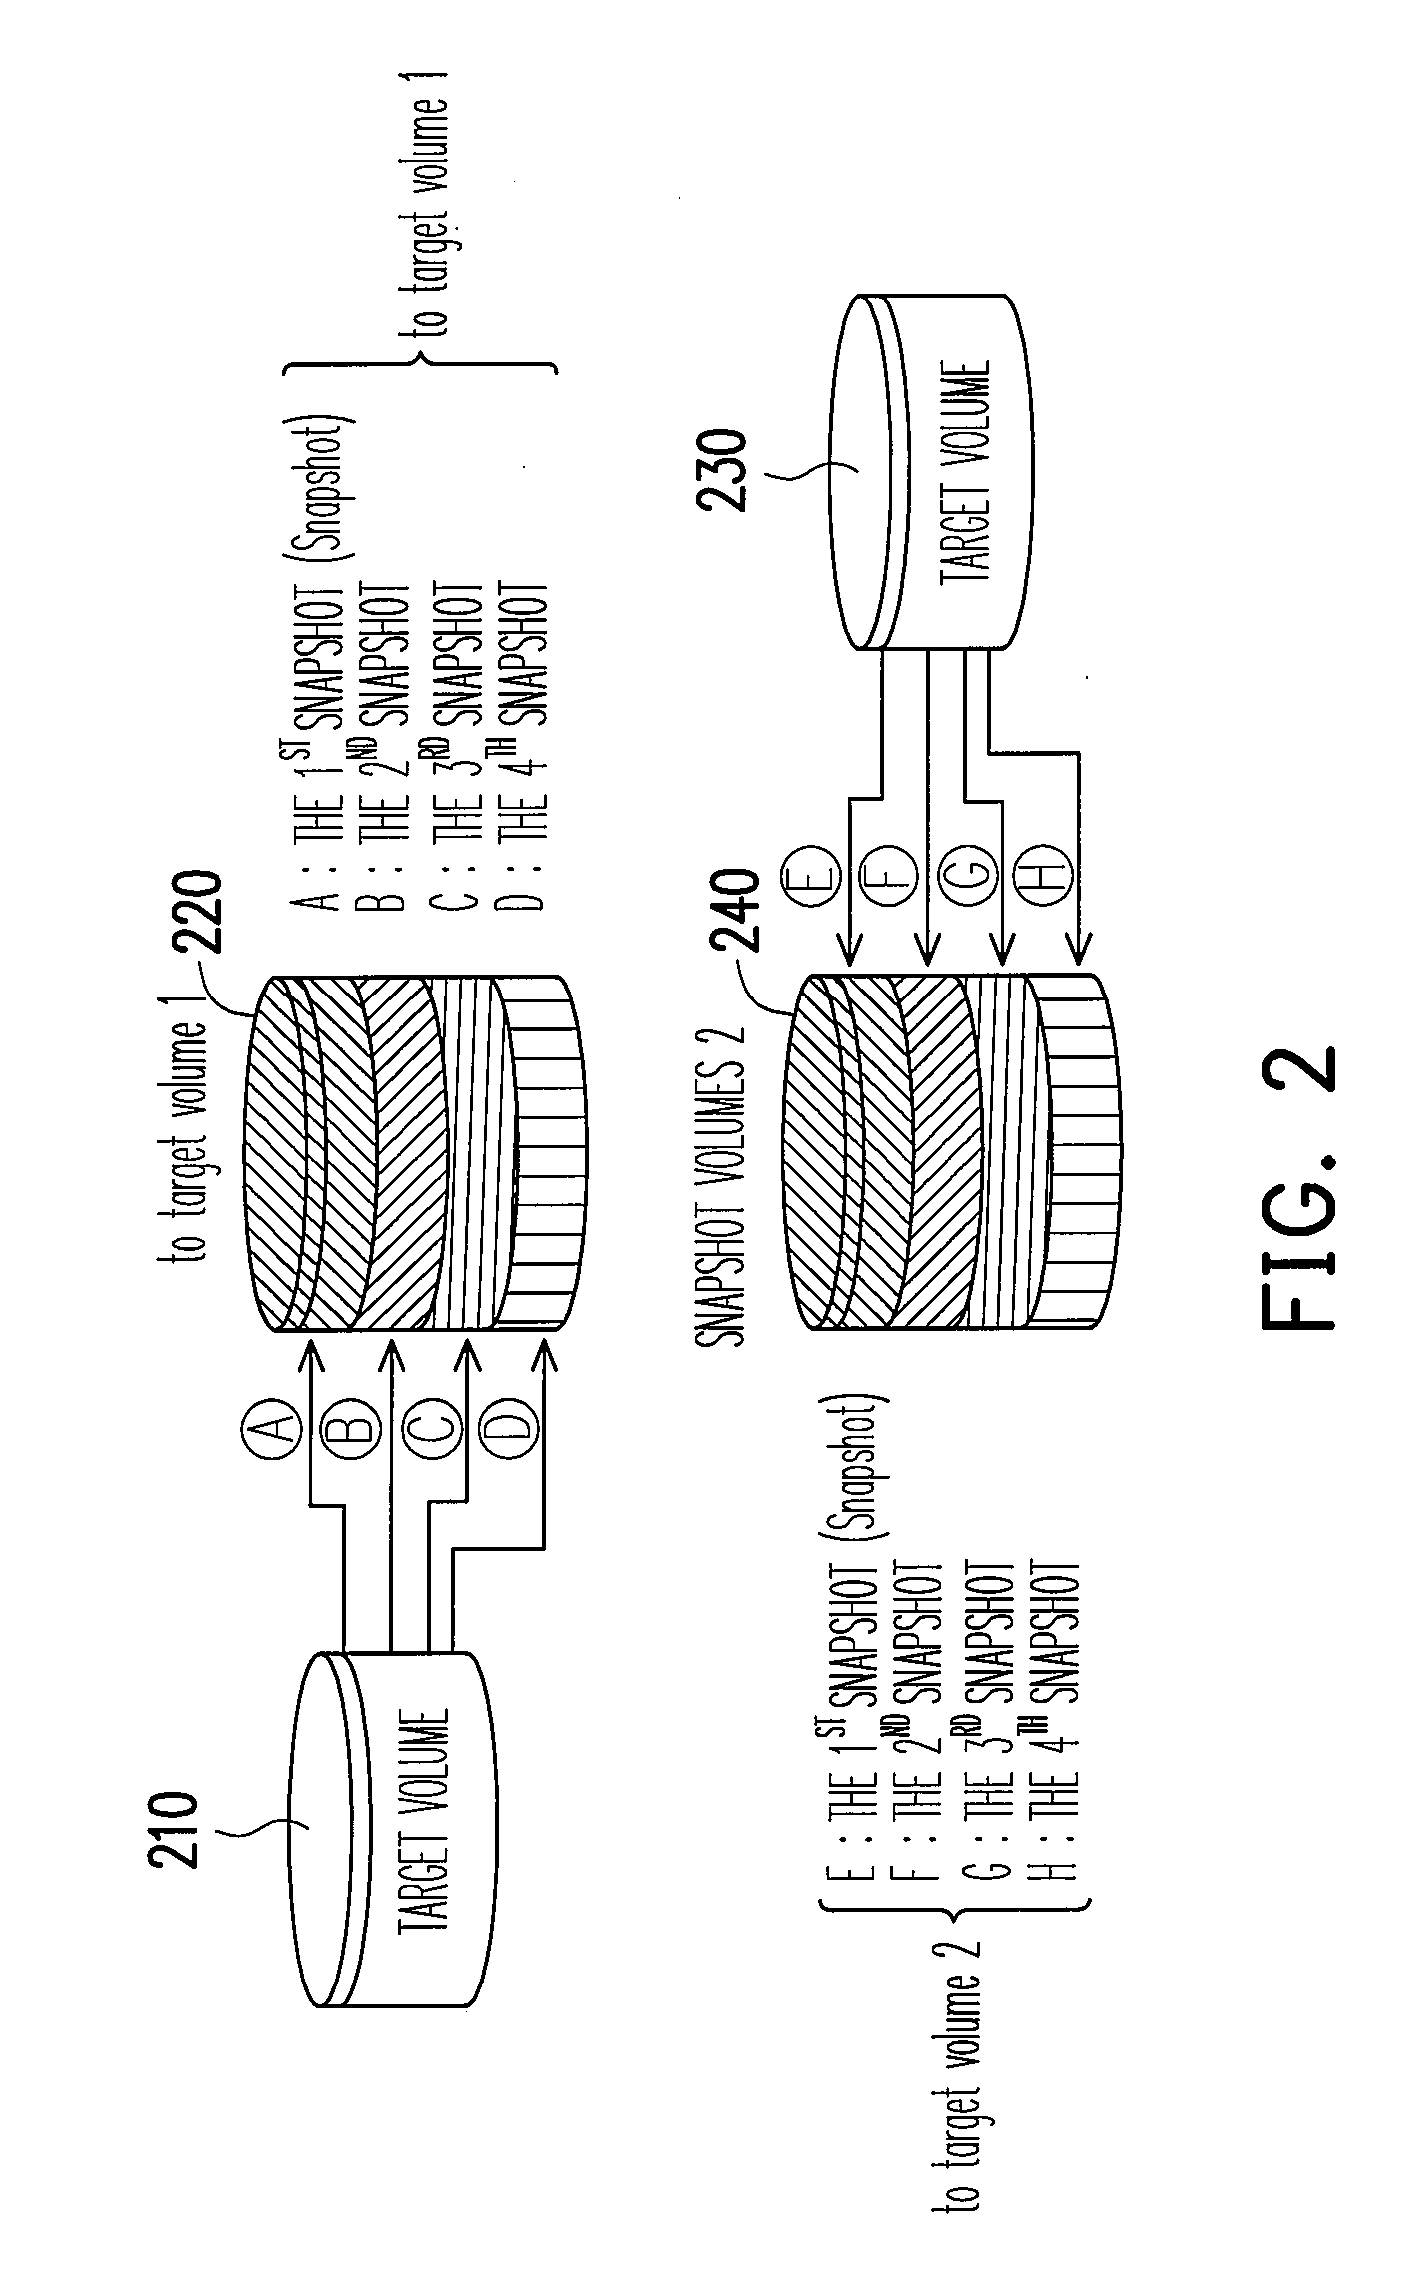 Snapshot mechanism in a data processing system and method and apparatus thereof